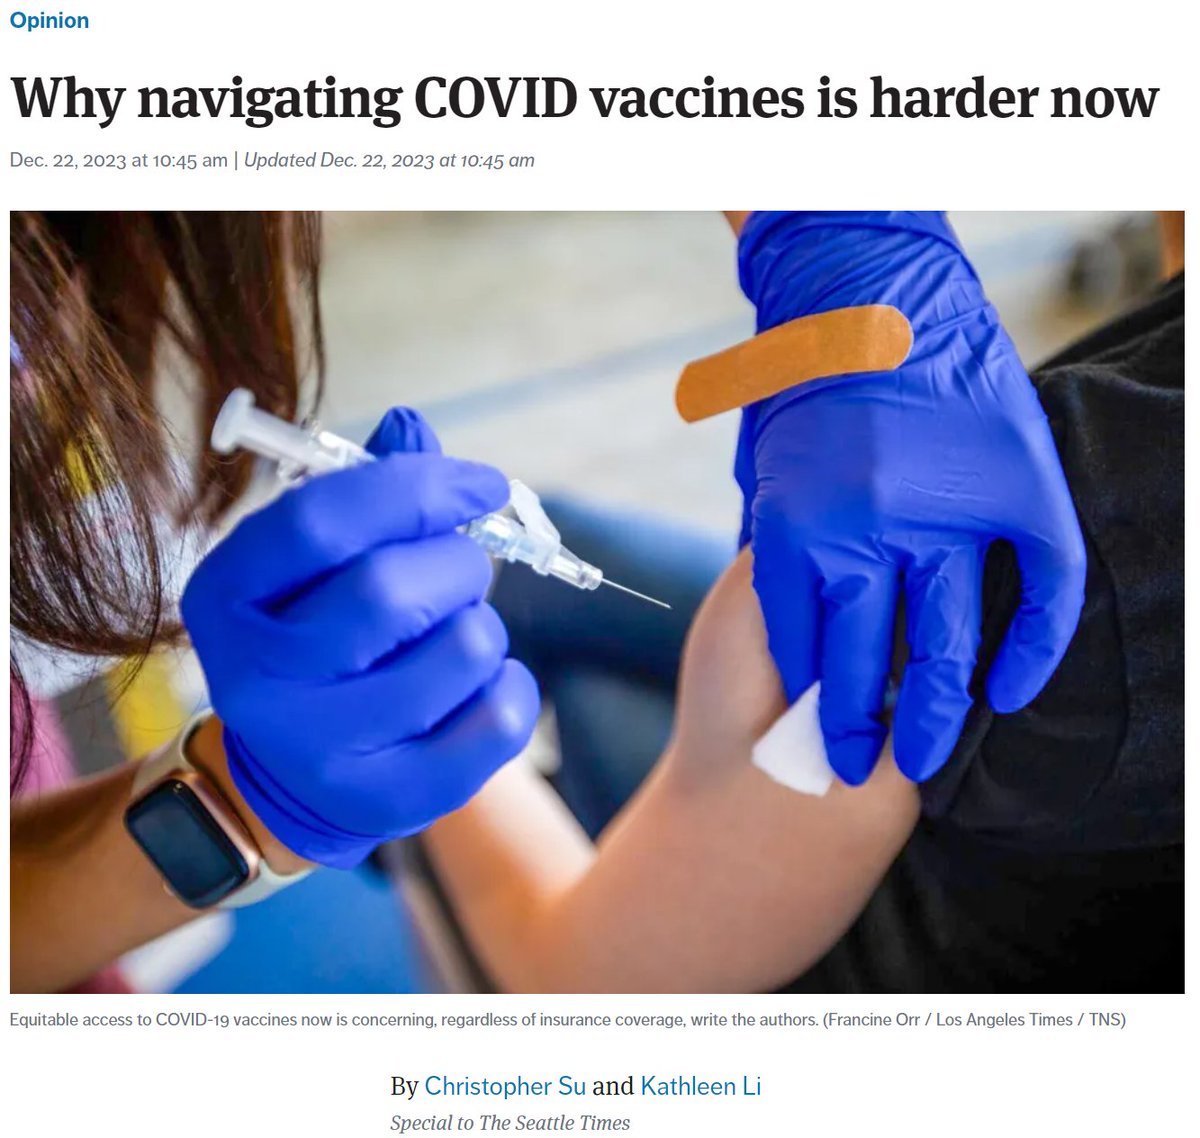 first article together with @KathyLiMD! get your COVID vaccines 💉 seattletimes.com/opinion/why-na…